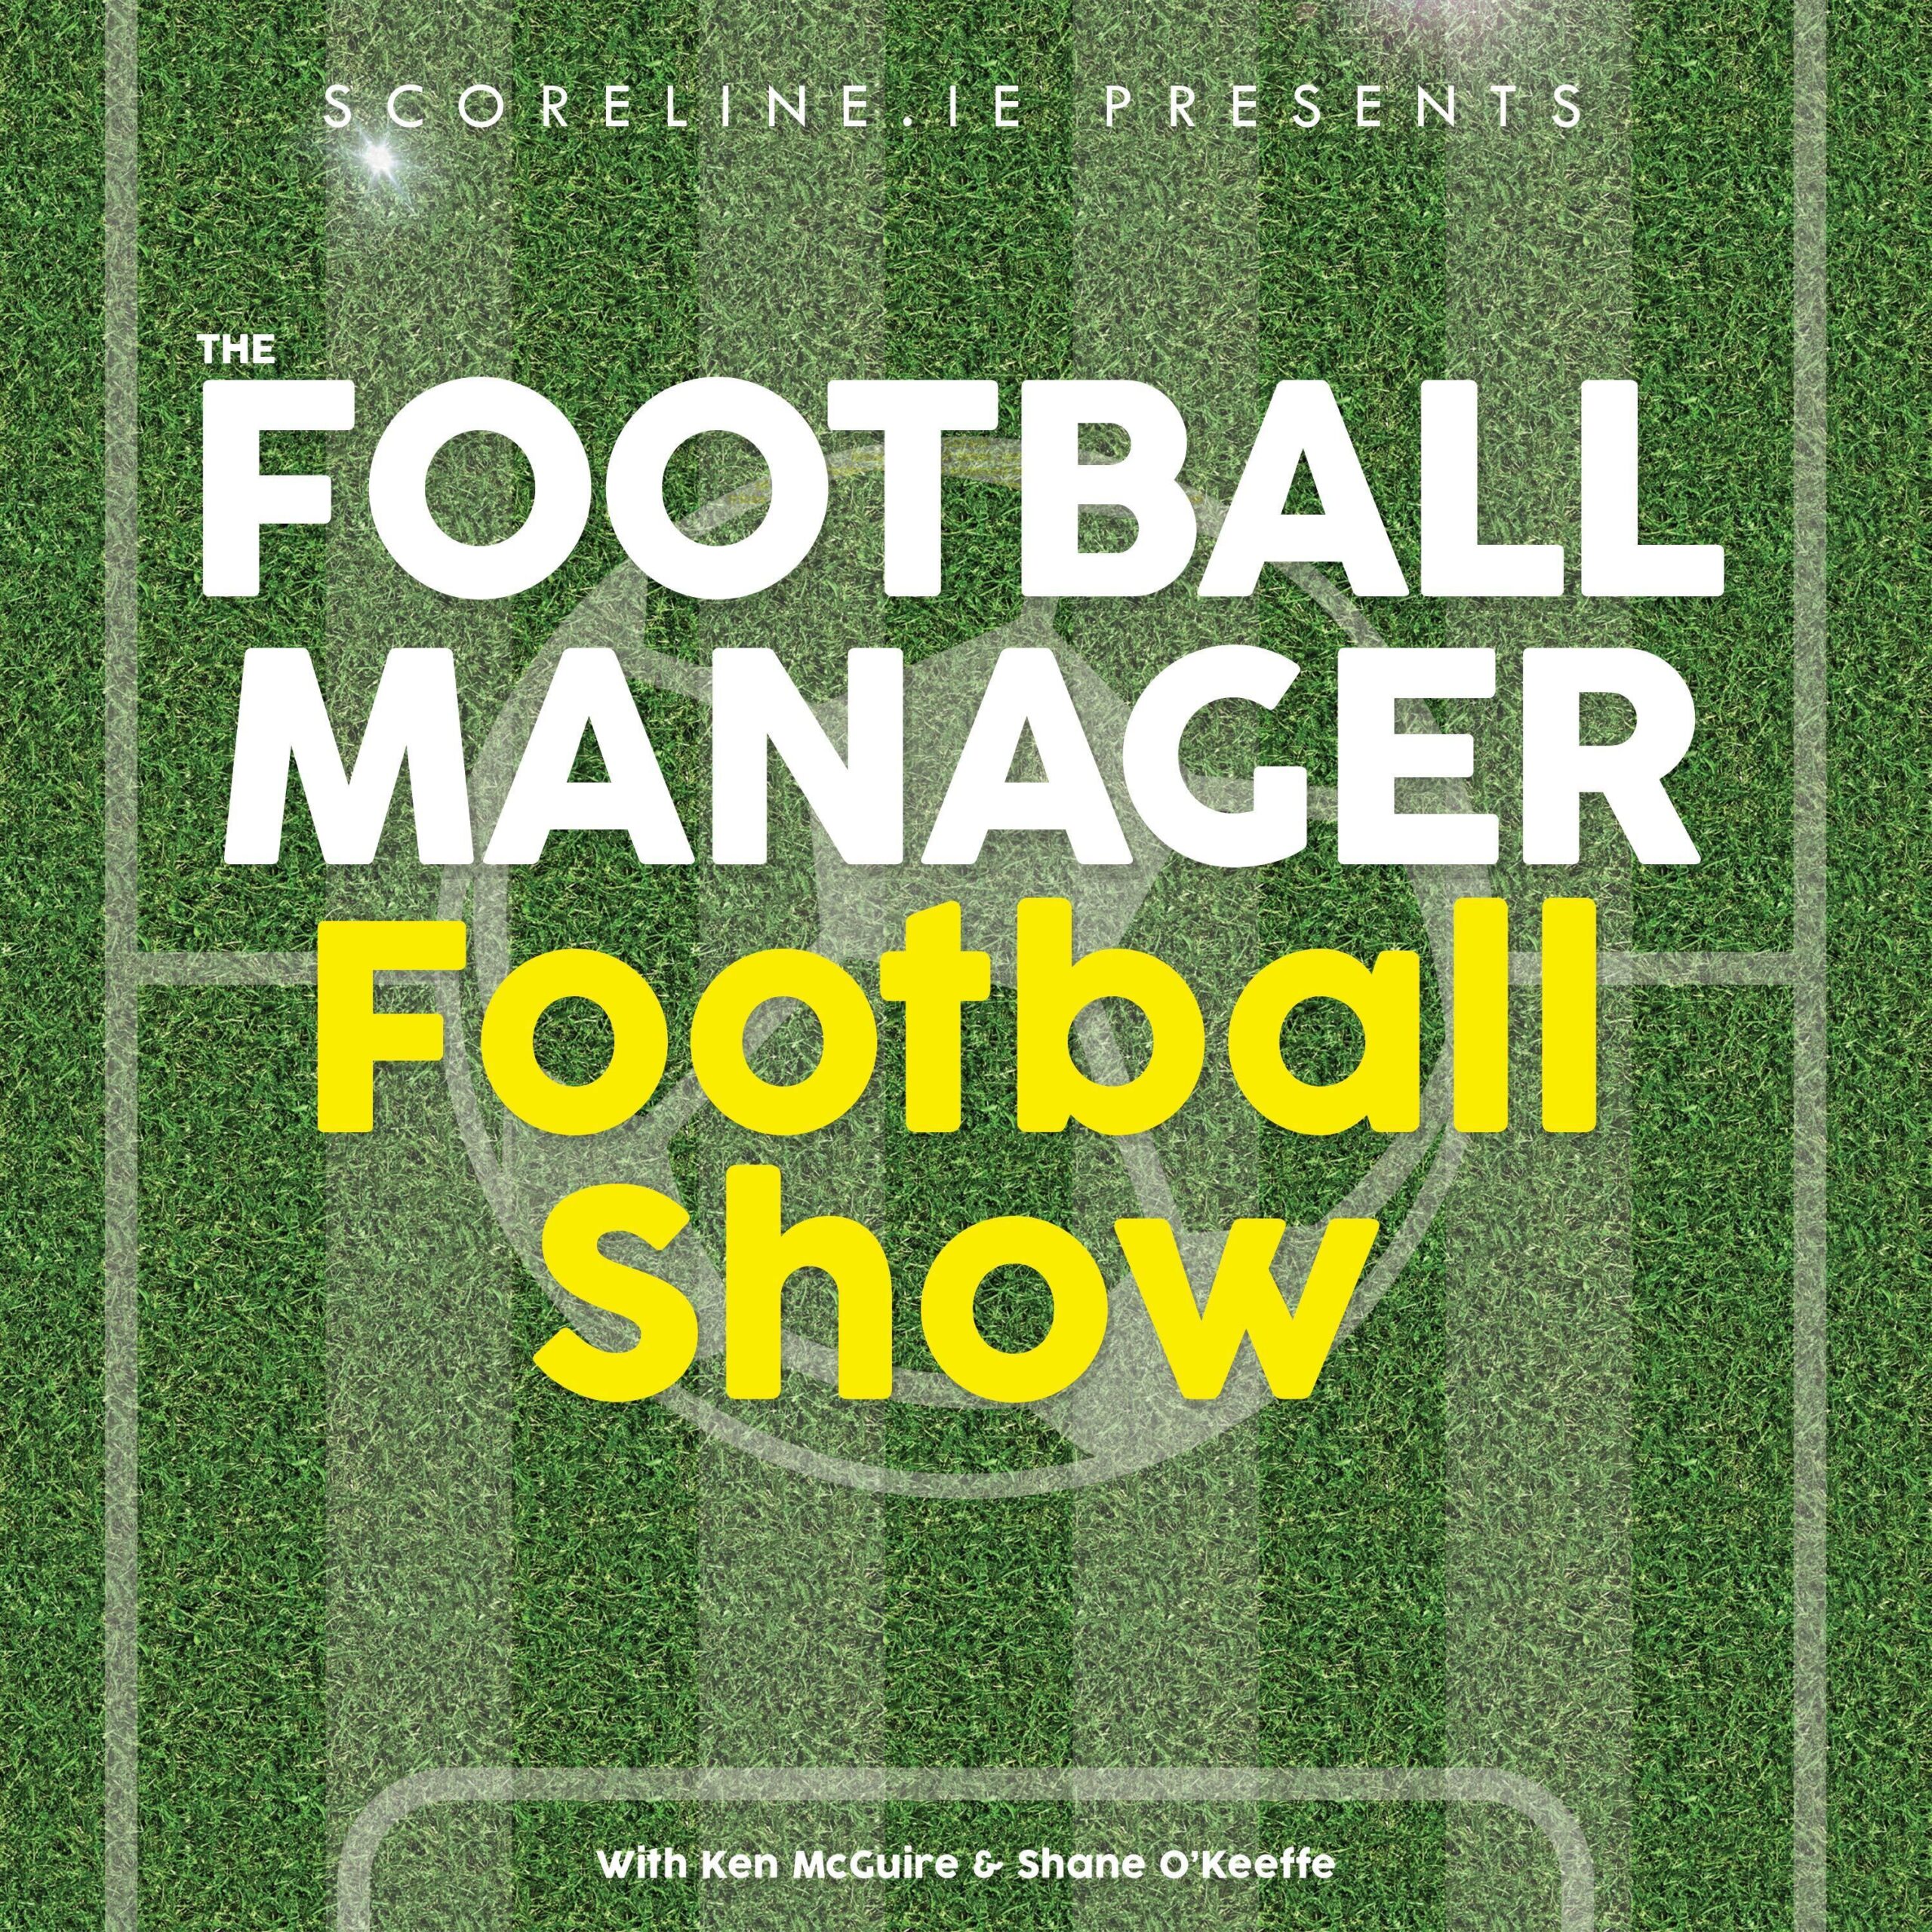 Football Manager Podcast